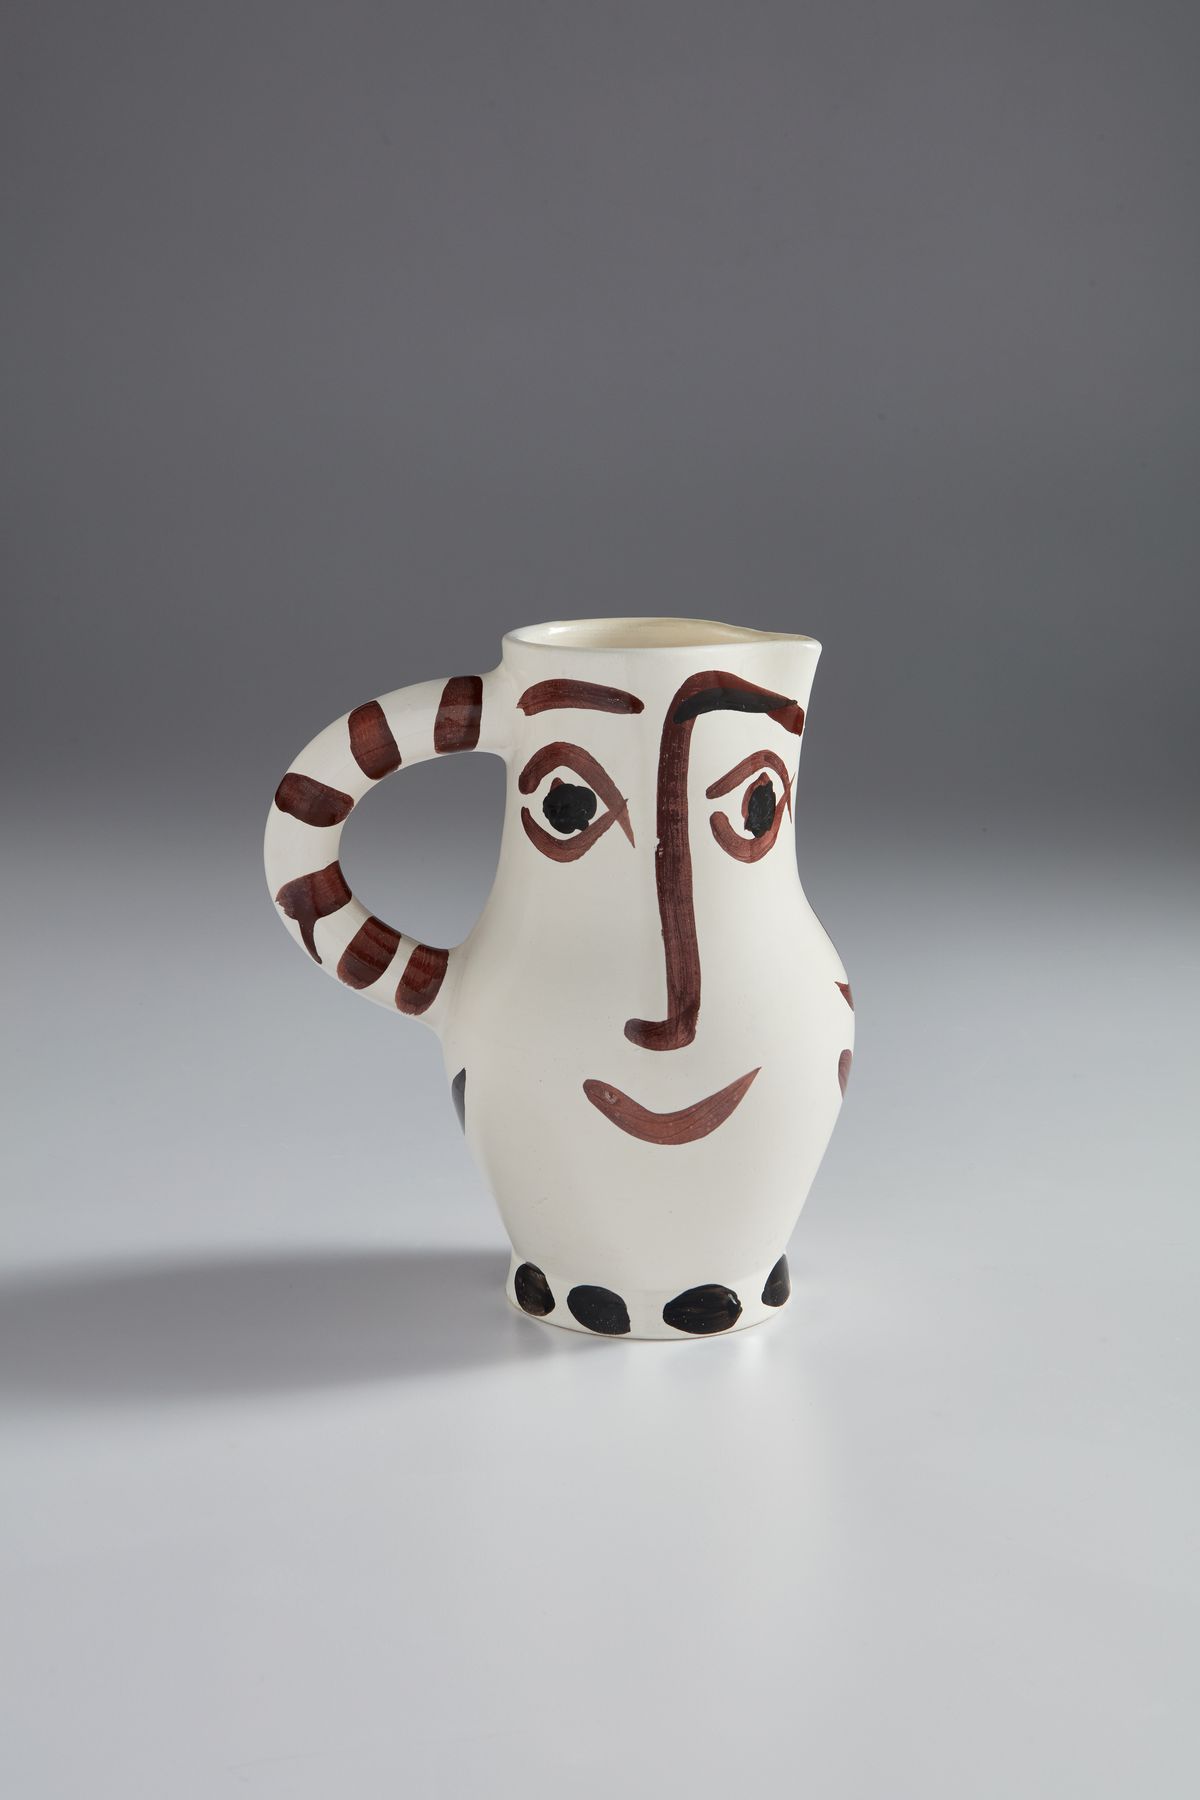 A curved white vase with a face painted on the body.